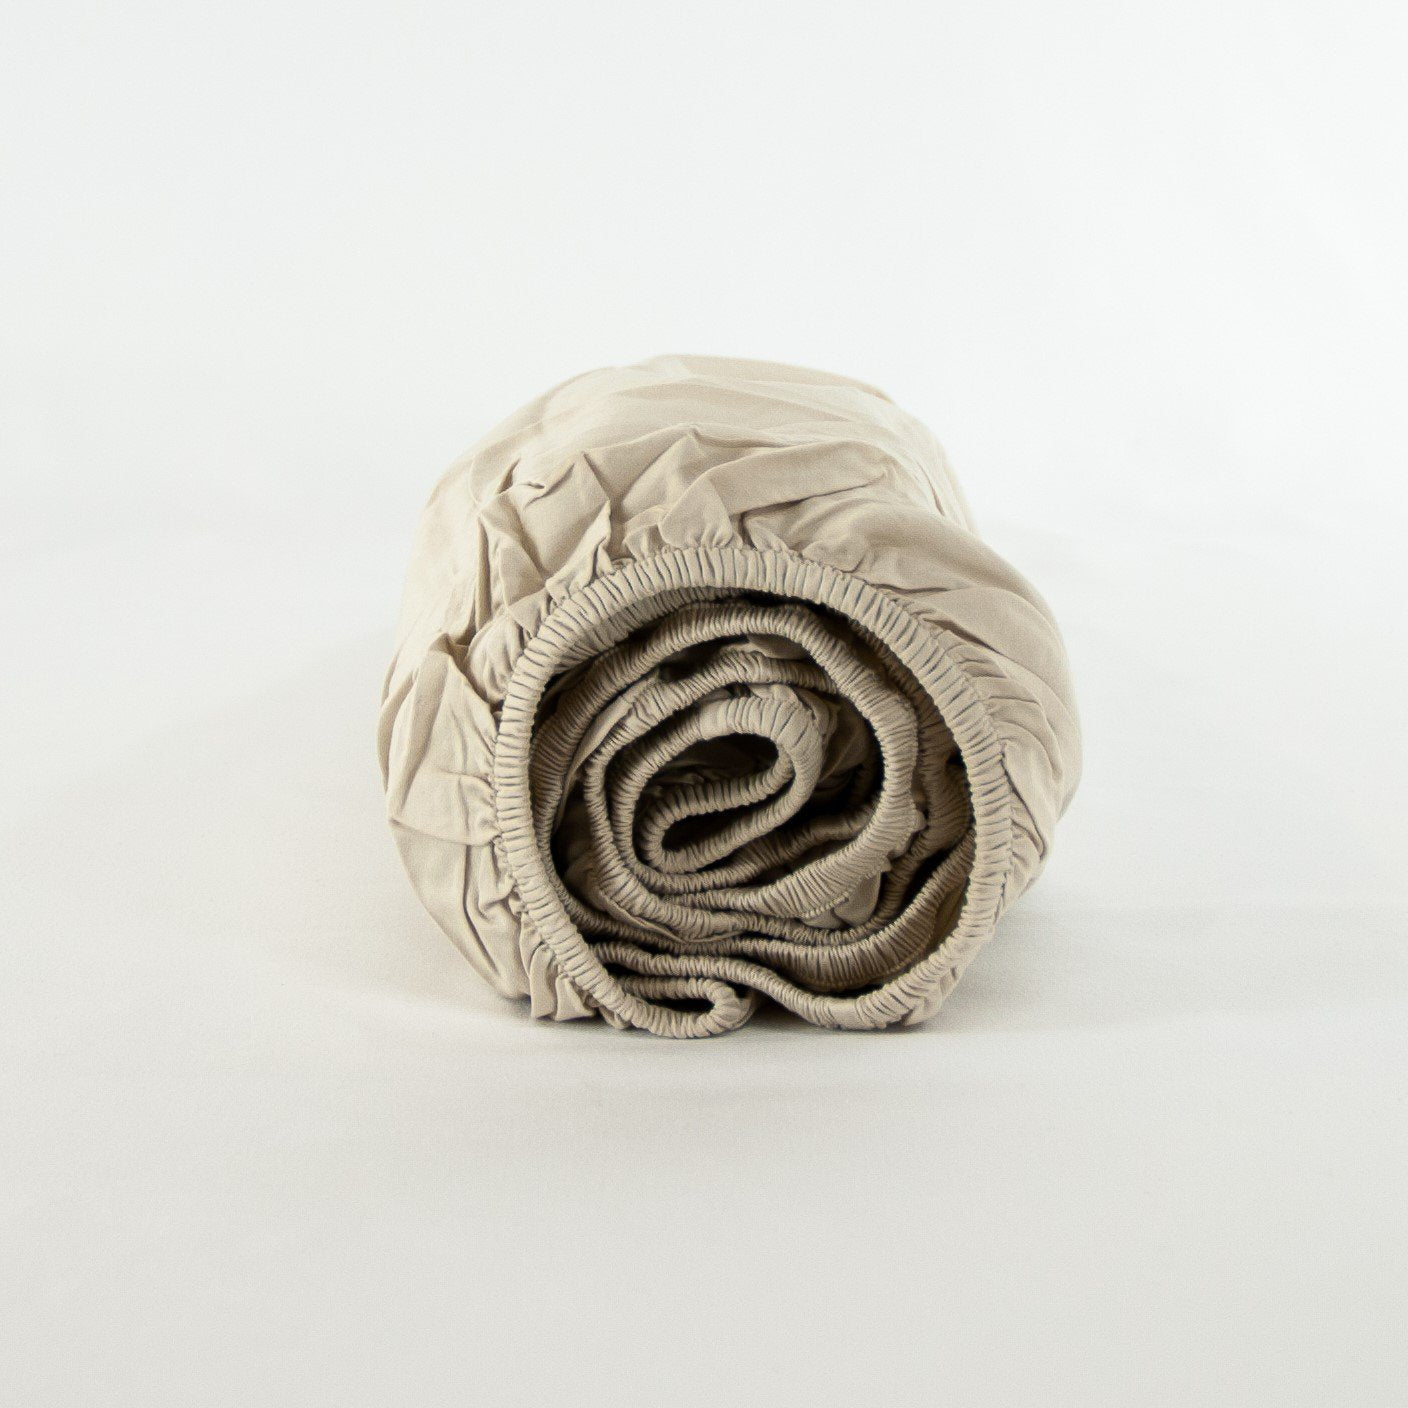 Rolled up organic cotton fitted cot sheet in egg shell white